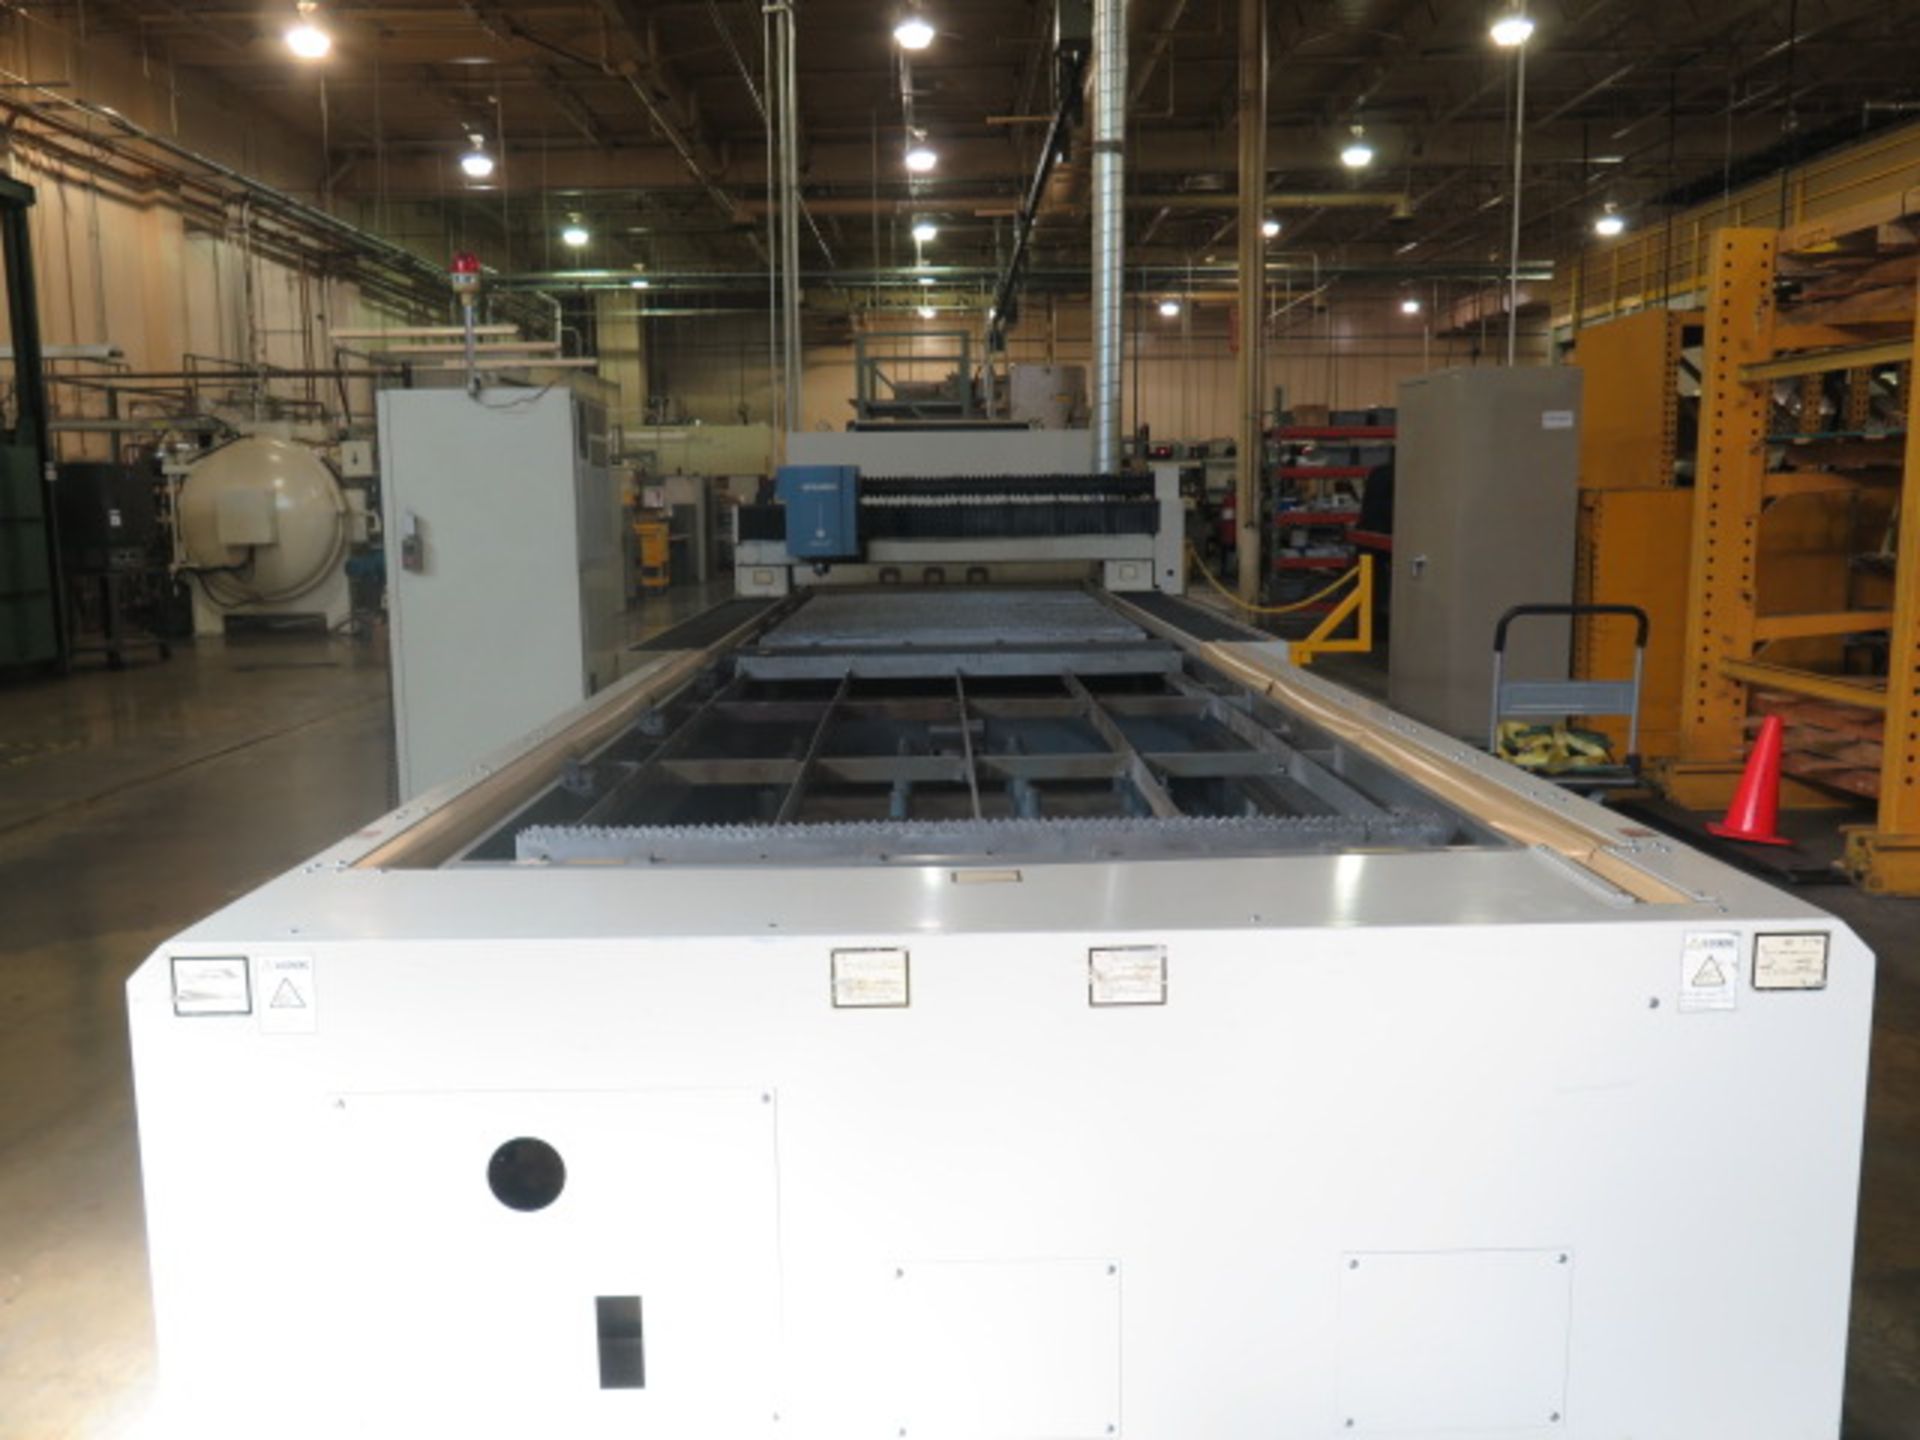 1997 Mitsubishi 3015 LXP 5’ x 10’ 2-Shuttle CNC Laser Contour Machine s/n LH44284 w/ SOLD AS IS - Image 12 of 36